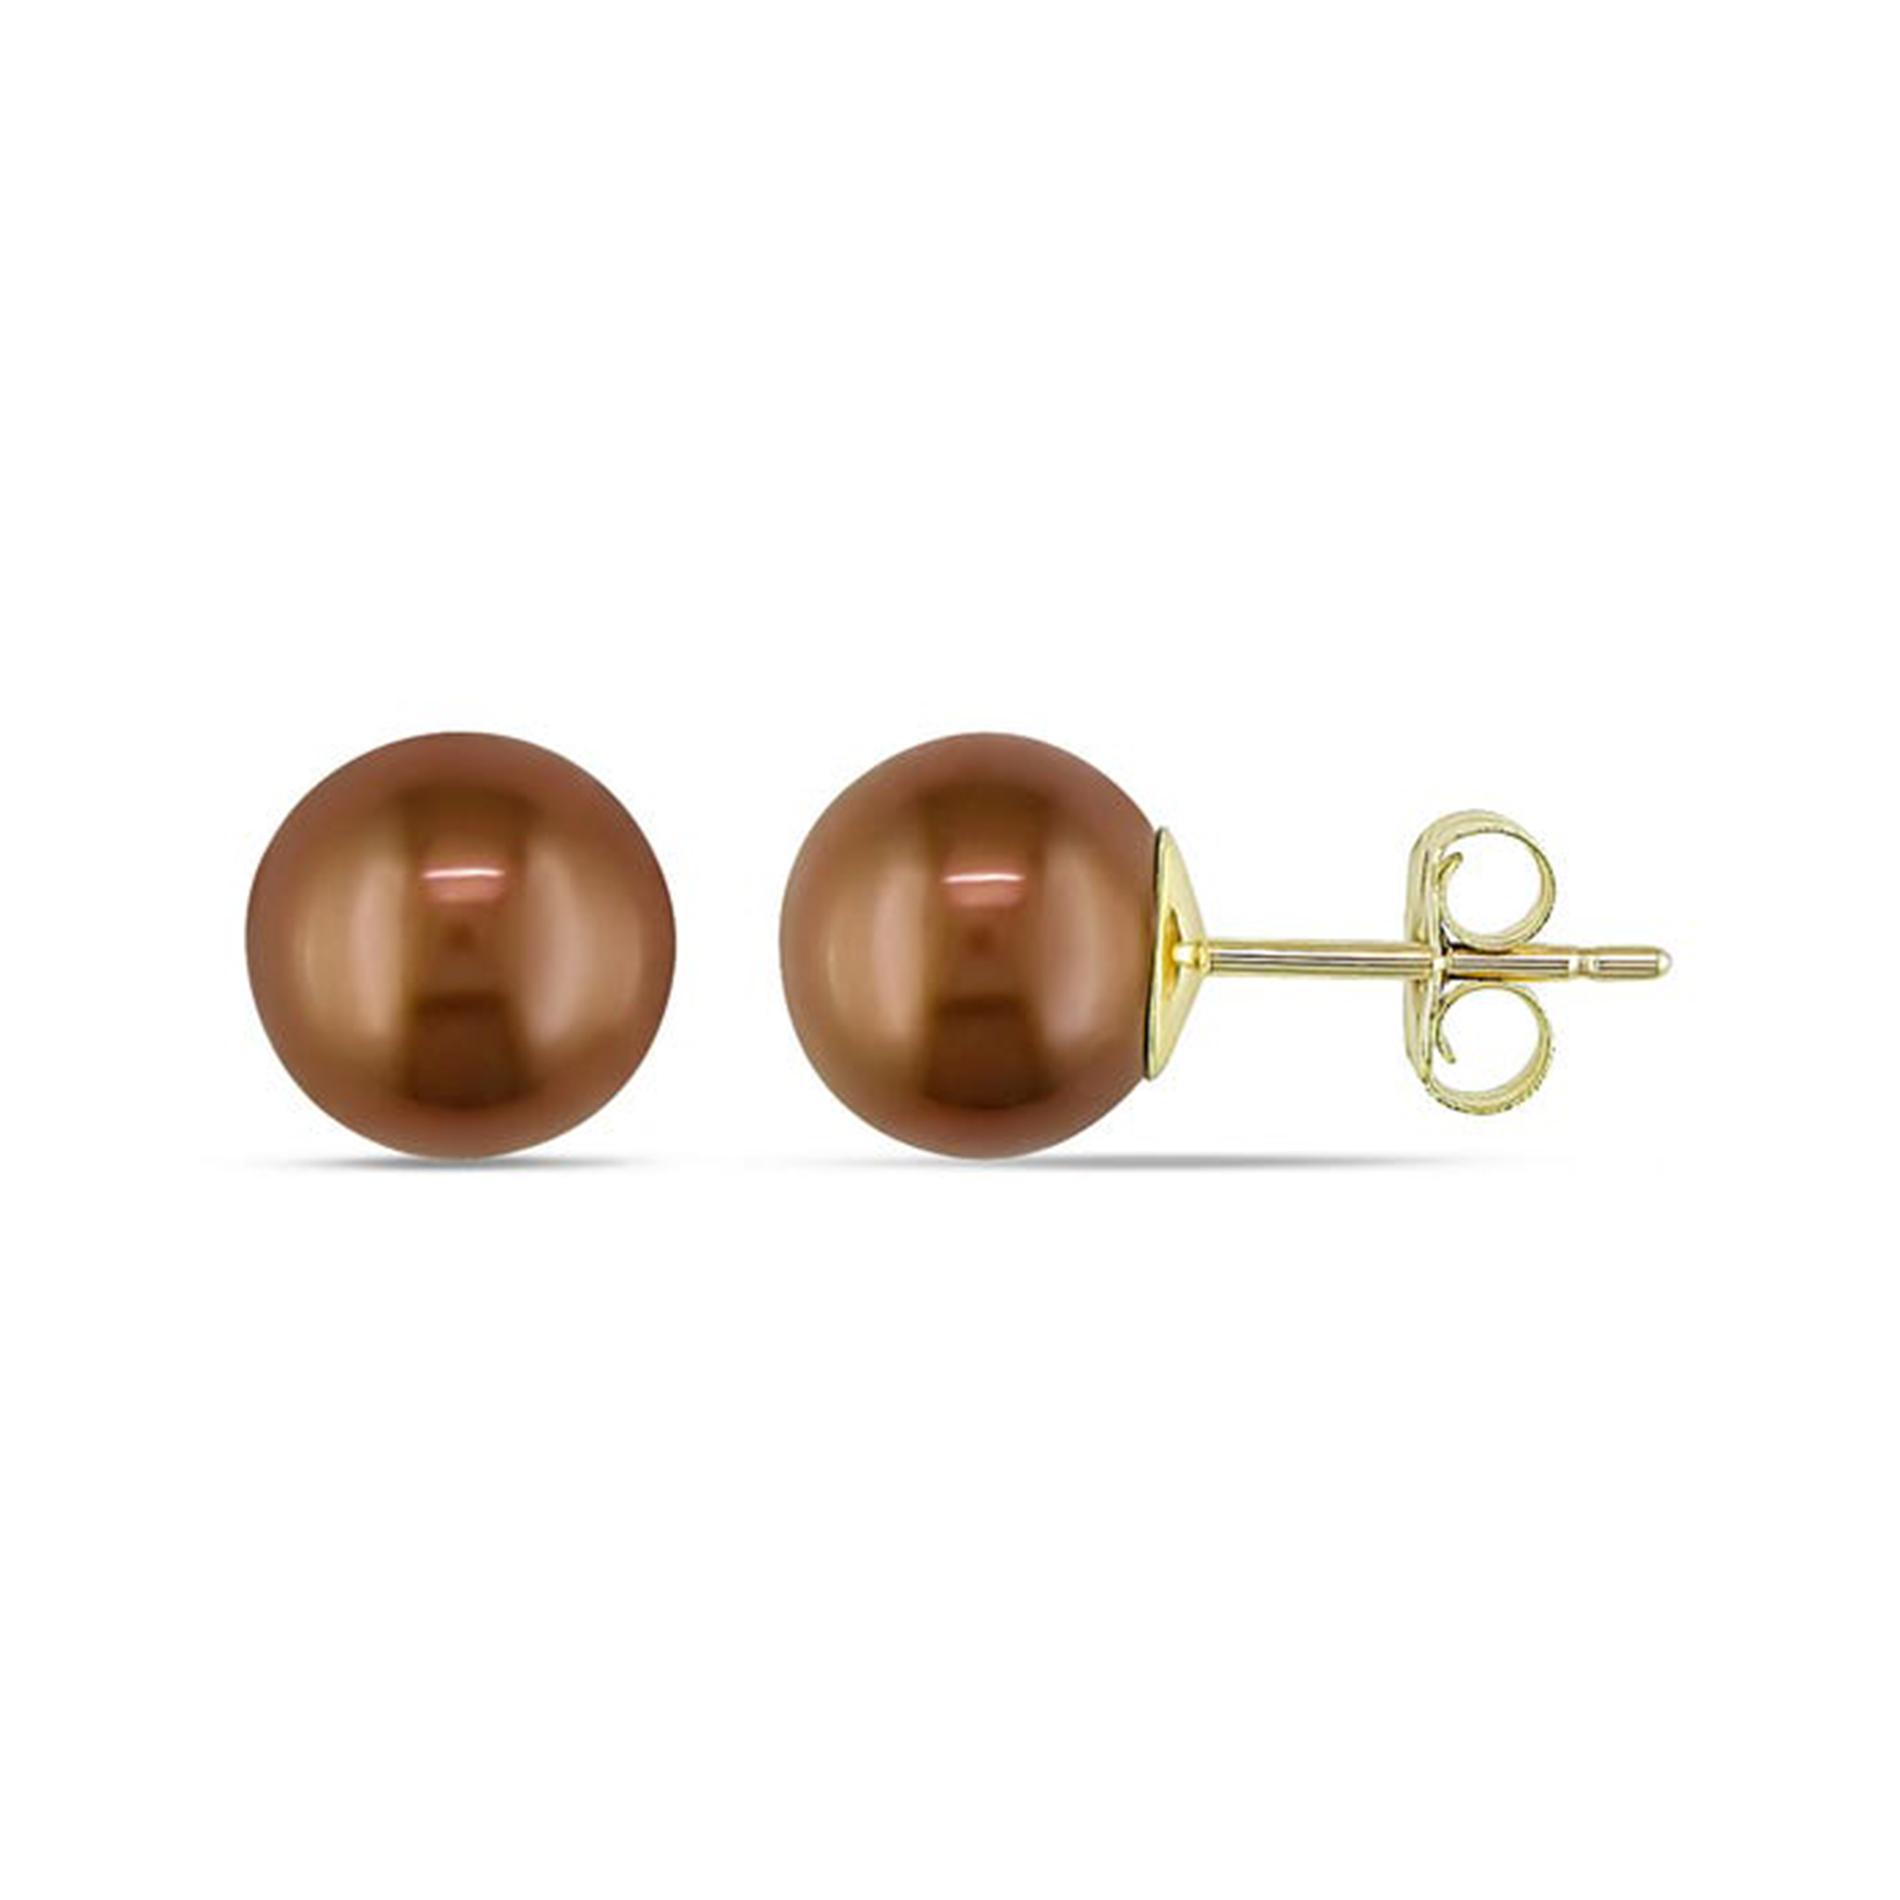 Bonjour Jewelers 14k Yellow Gold 7 MM Brown Freshwater Cultured Pearl Stud Earrings